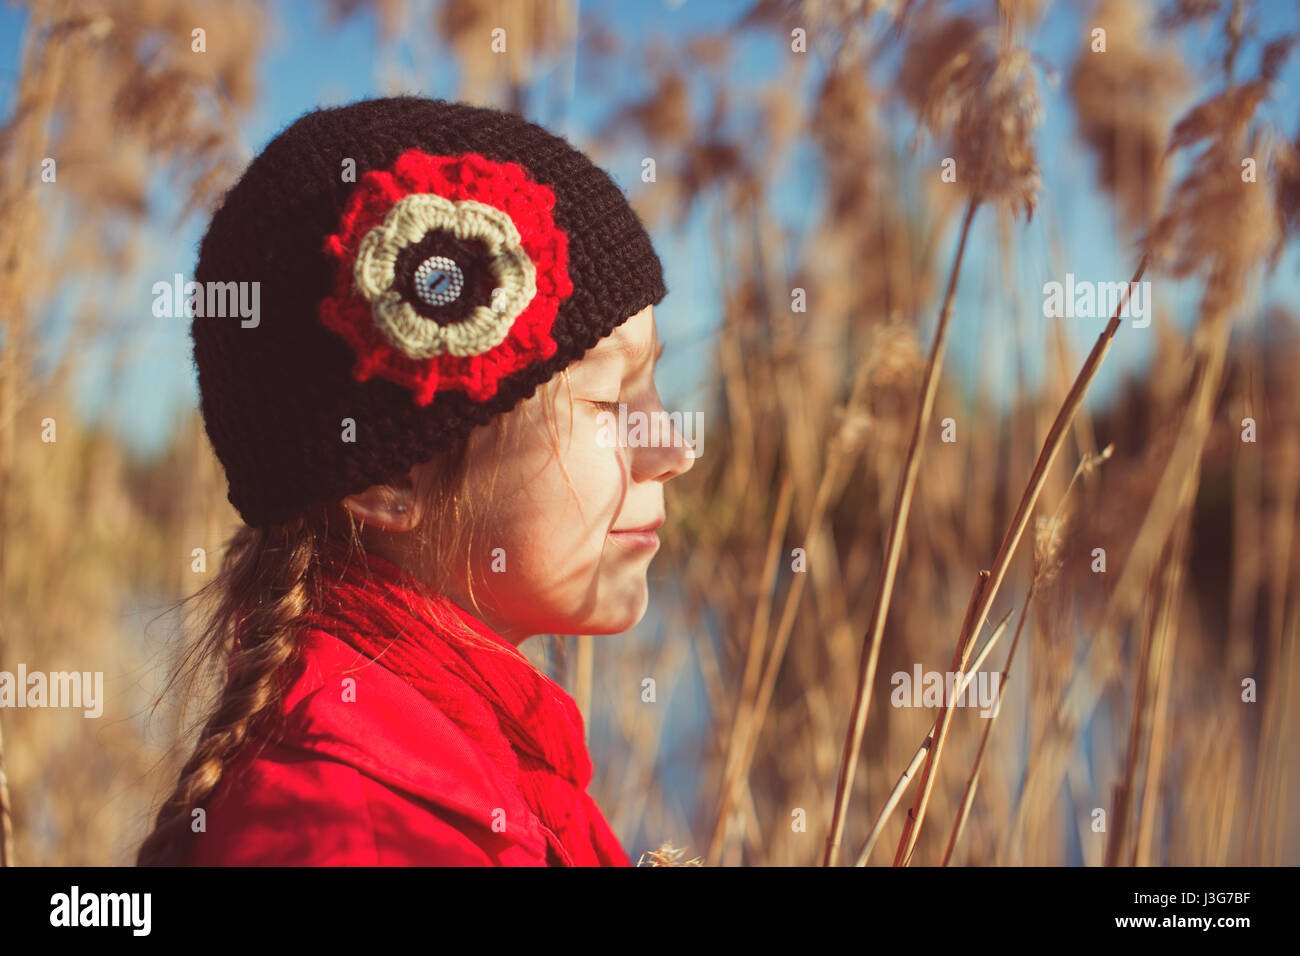 child girl closed her eyes against the sun by bright springtime day inside dry reed stalks Stock Photo